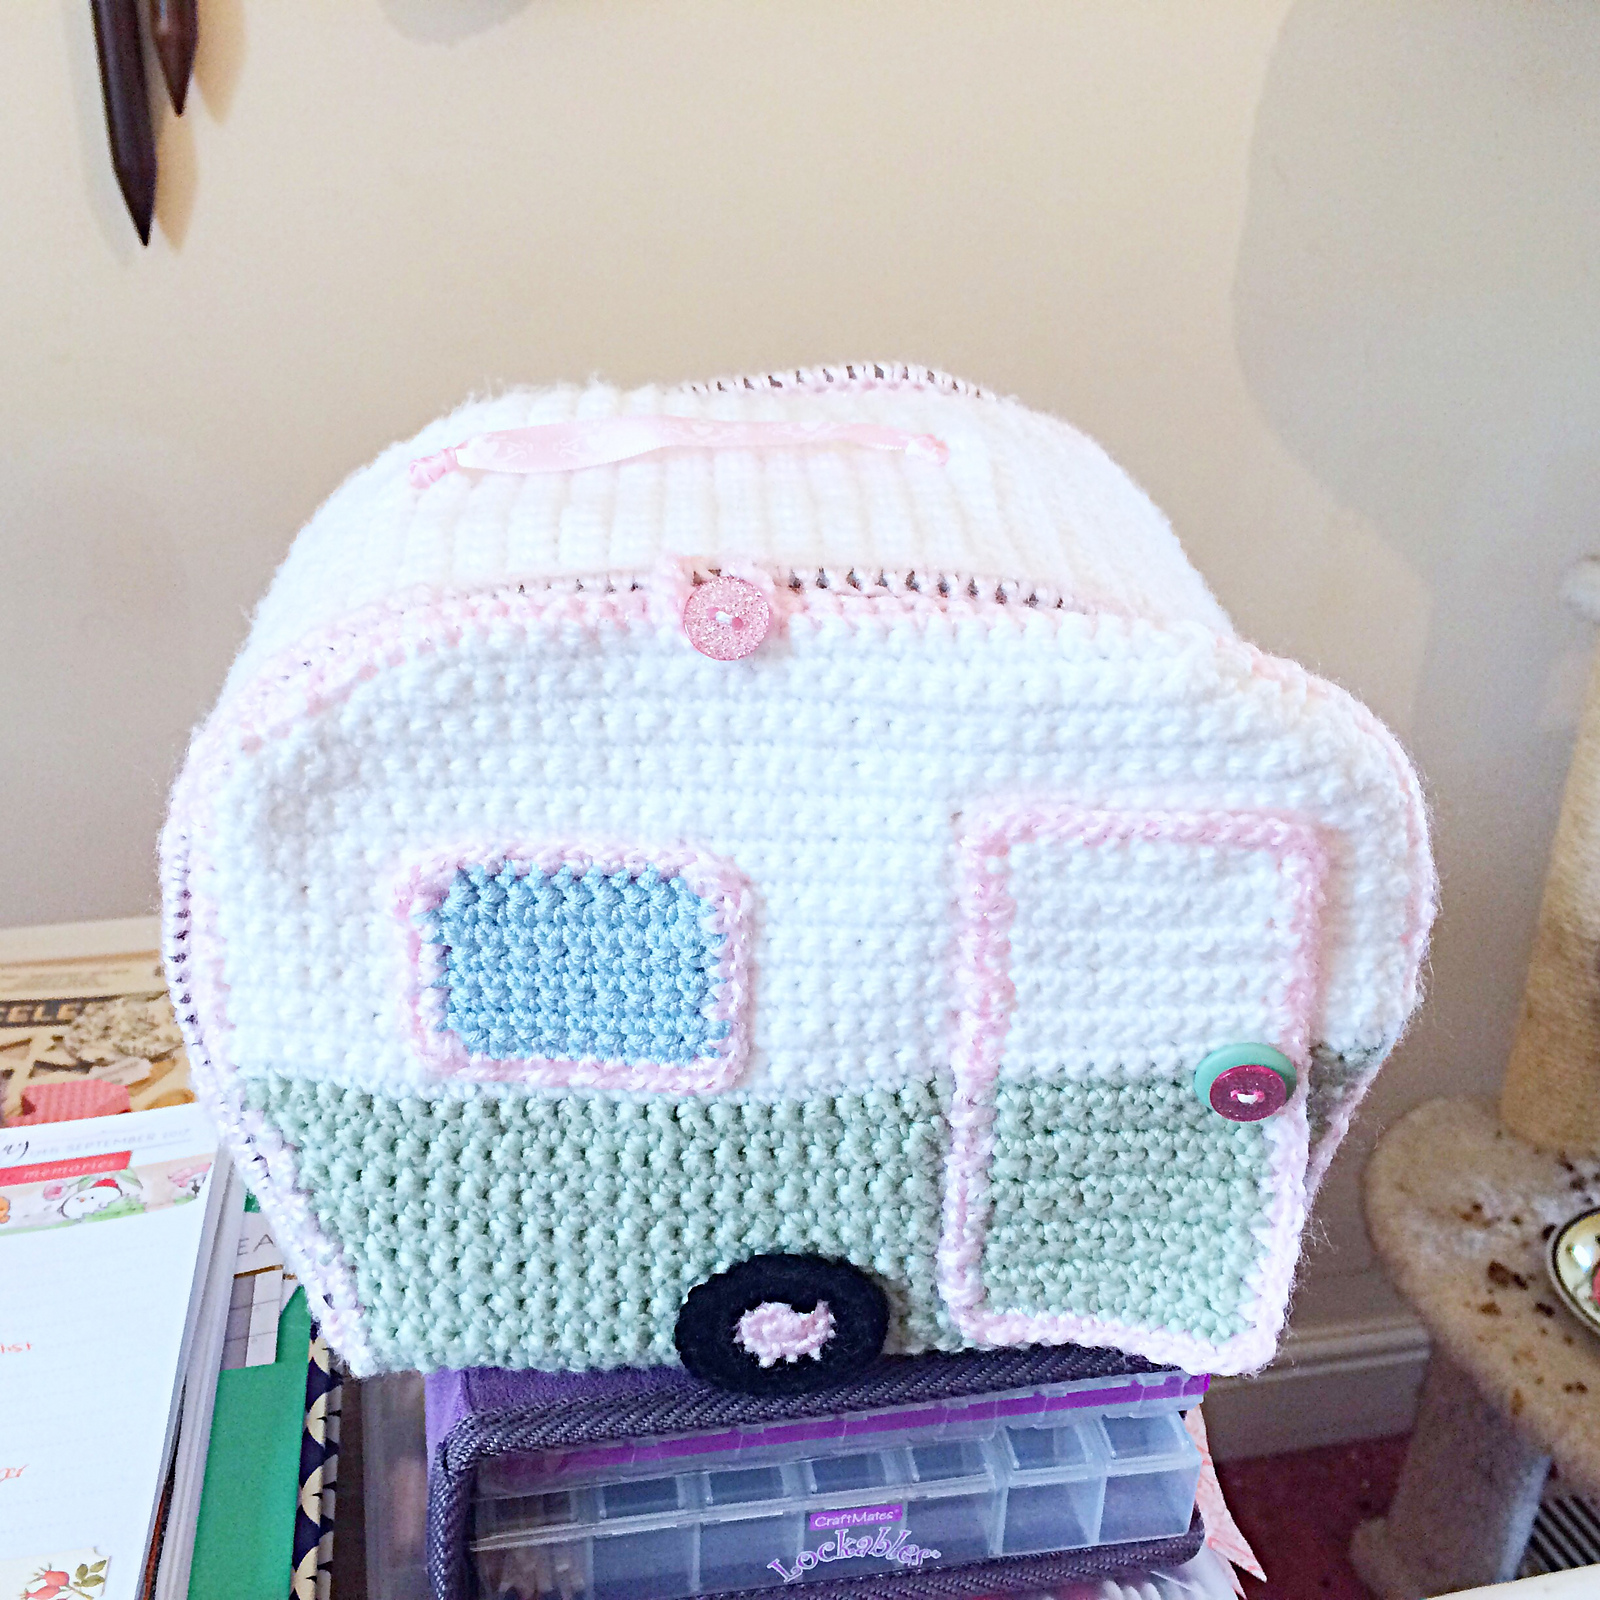 The exterior of a doll house style crocheted caravan